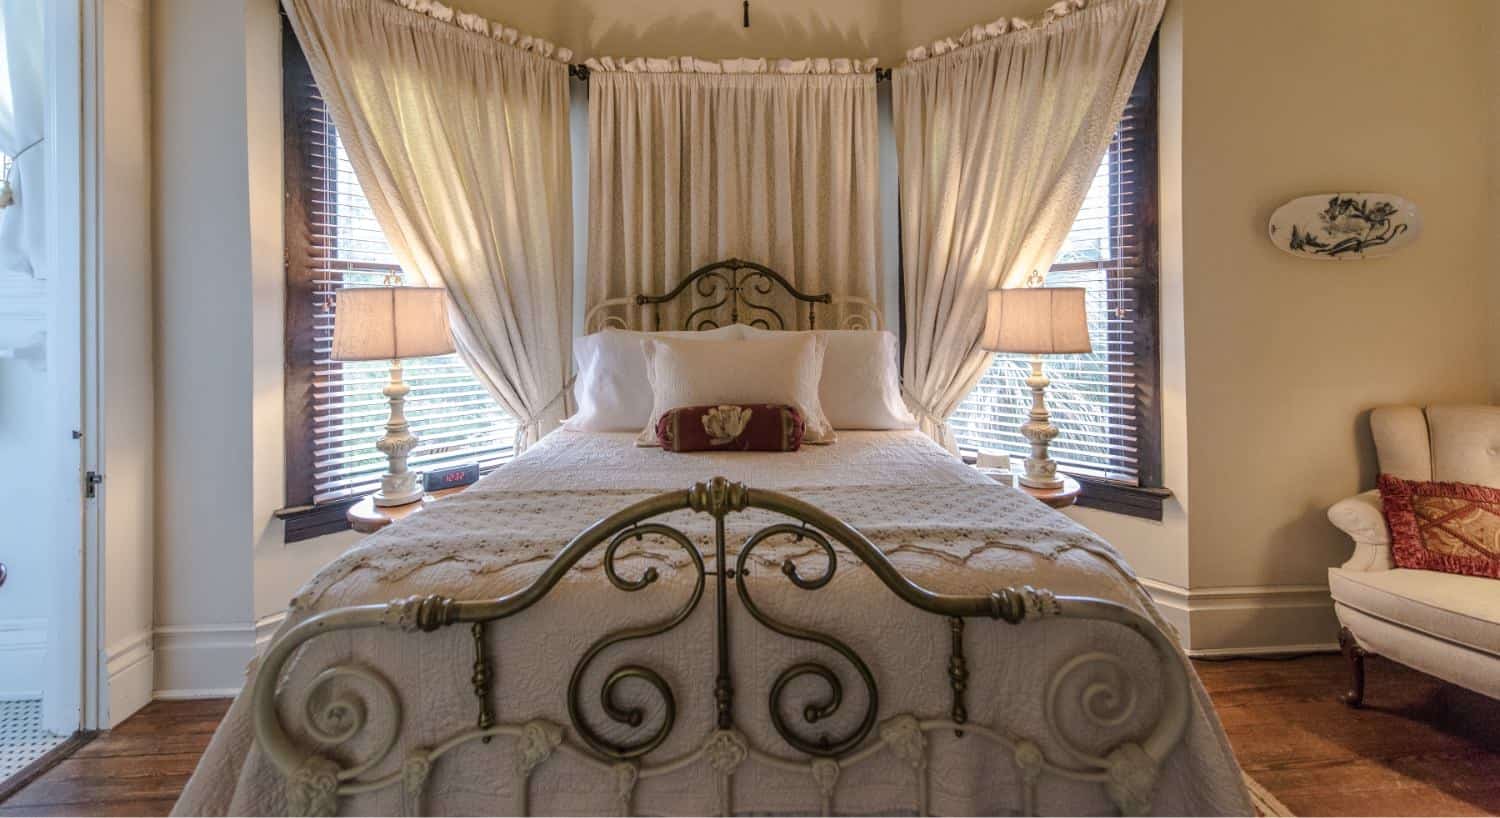 Bedroom with cream-colored walls, hardwood floors, iron bed with cream bedding, and cream upholstered chair